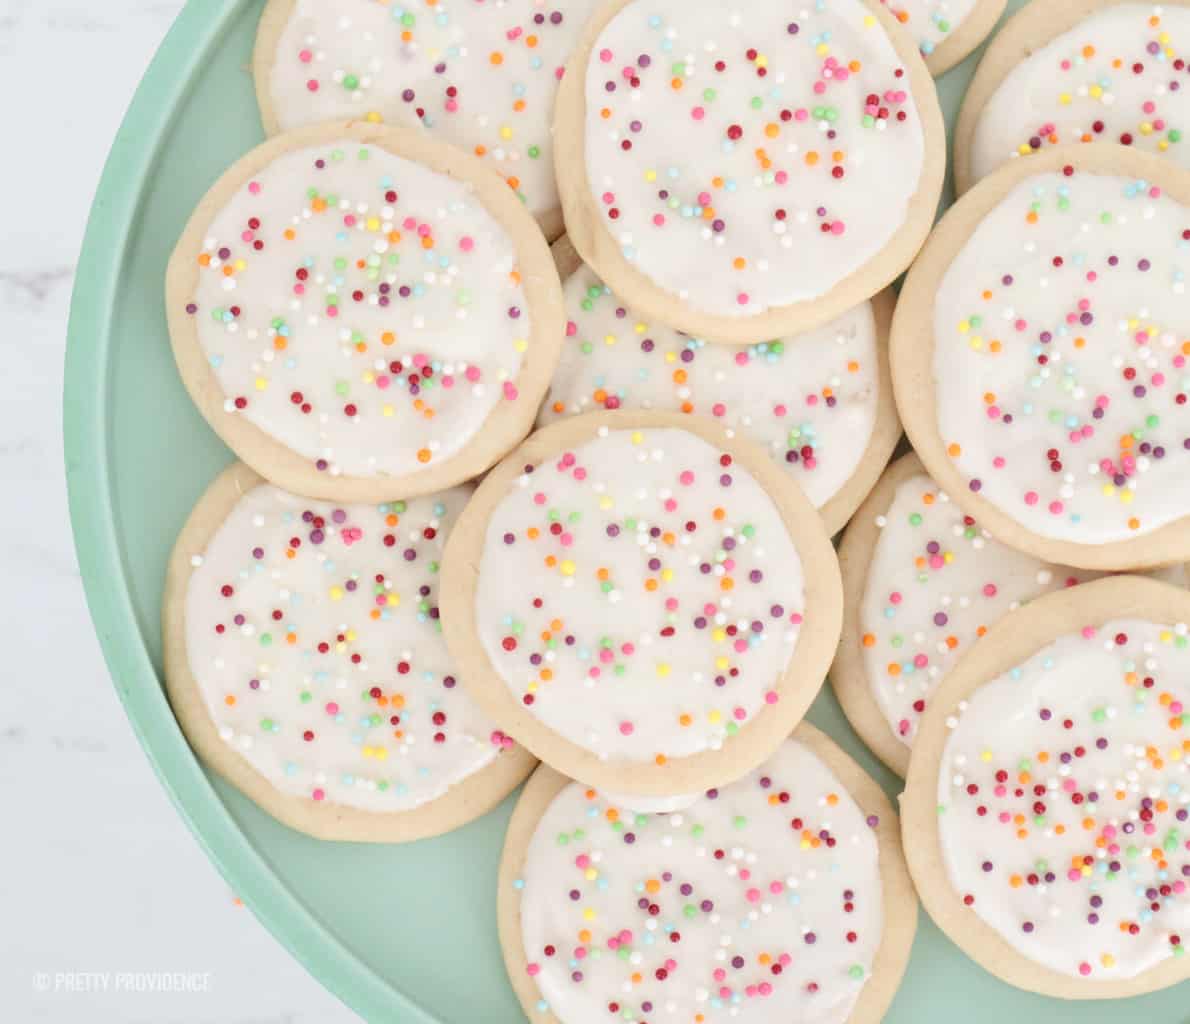 Homemade sugar cookies with cream cheese frosting and sprinkles on a jade plate